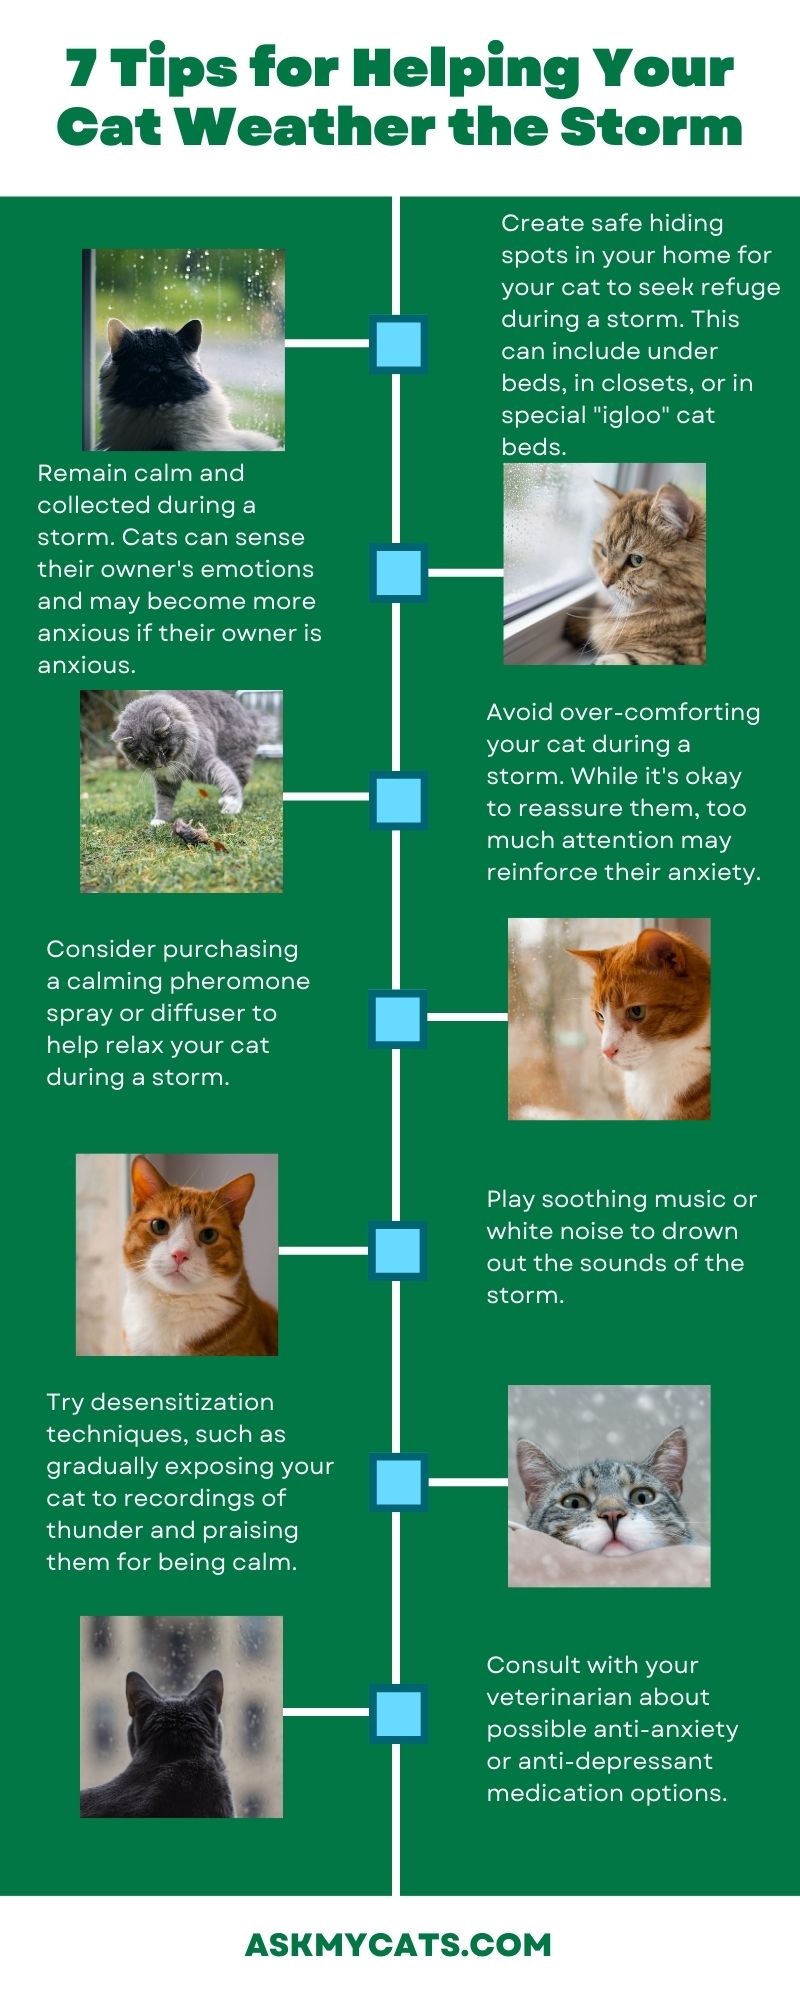 7 Tips for Helping Your Cat Weather the Storm